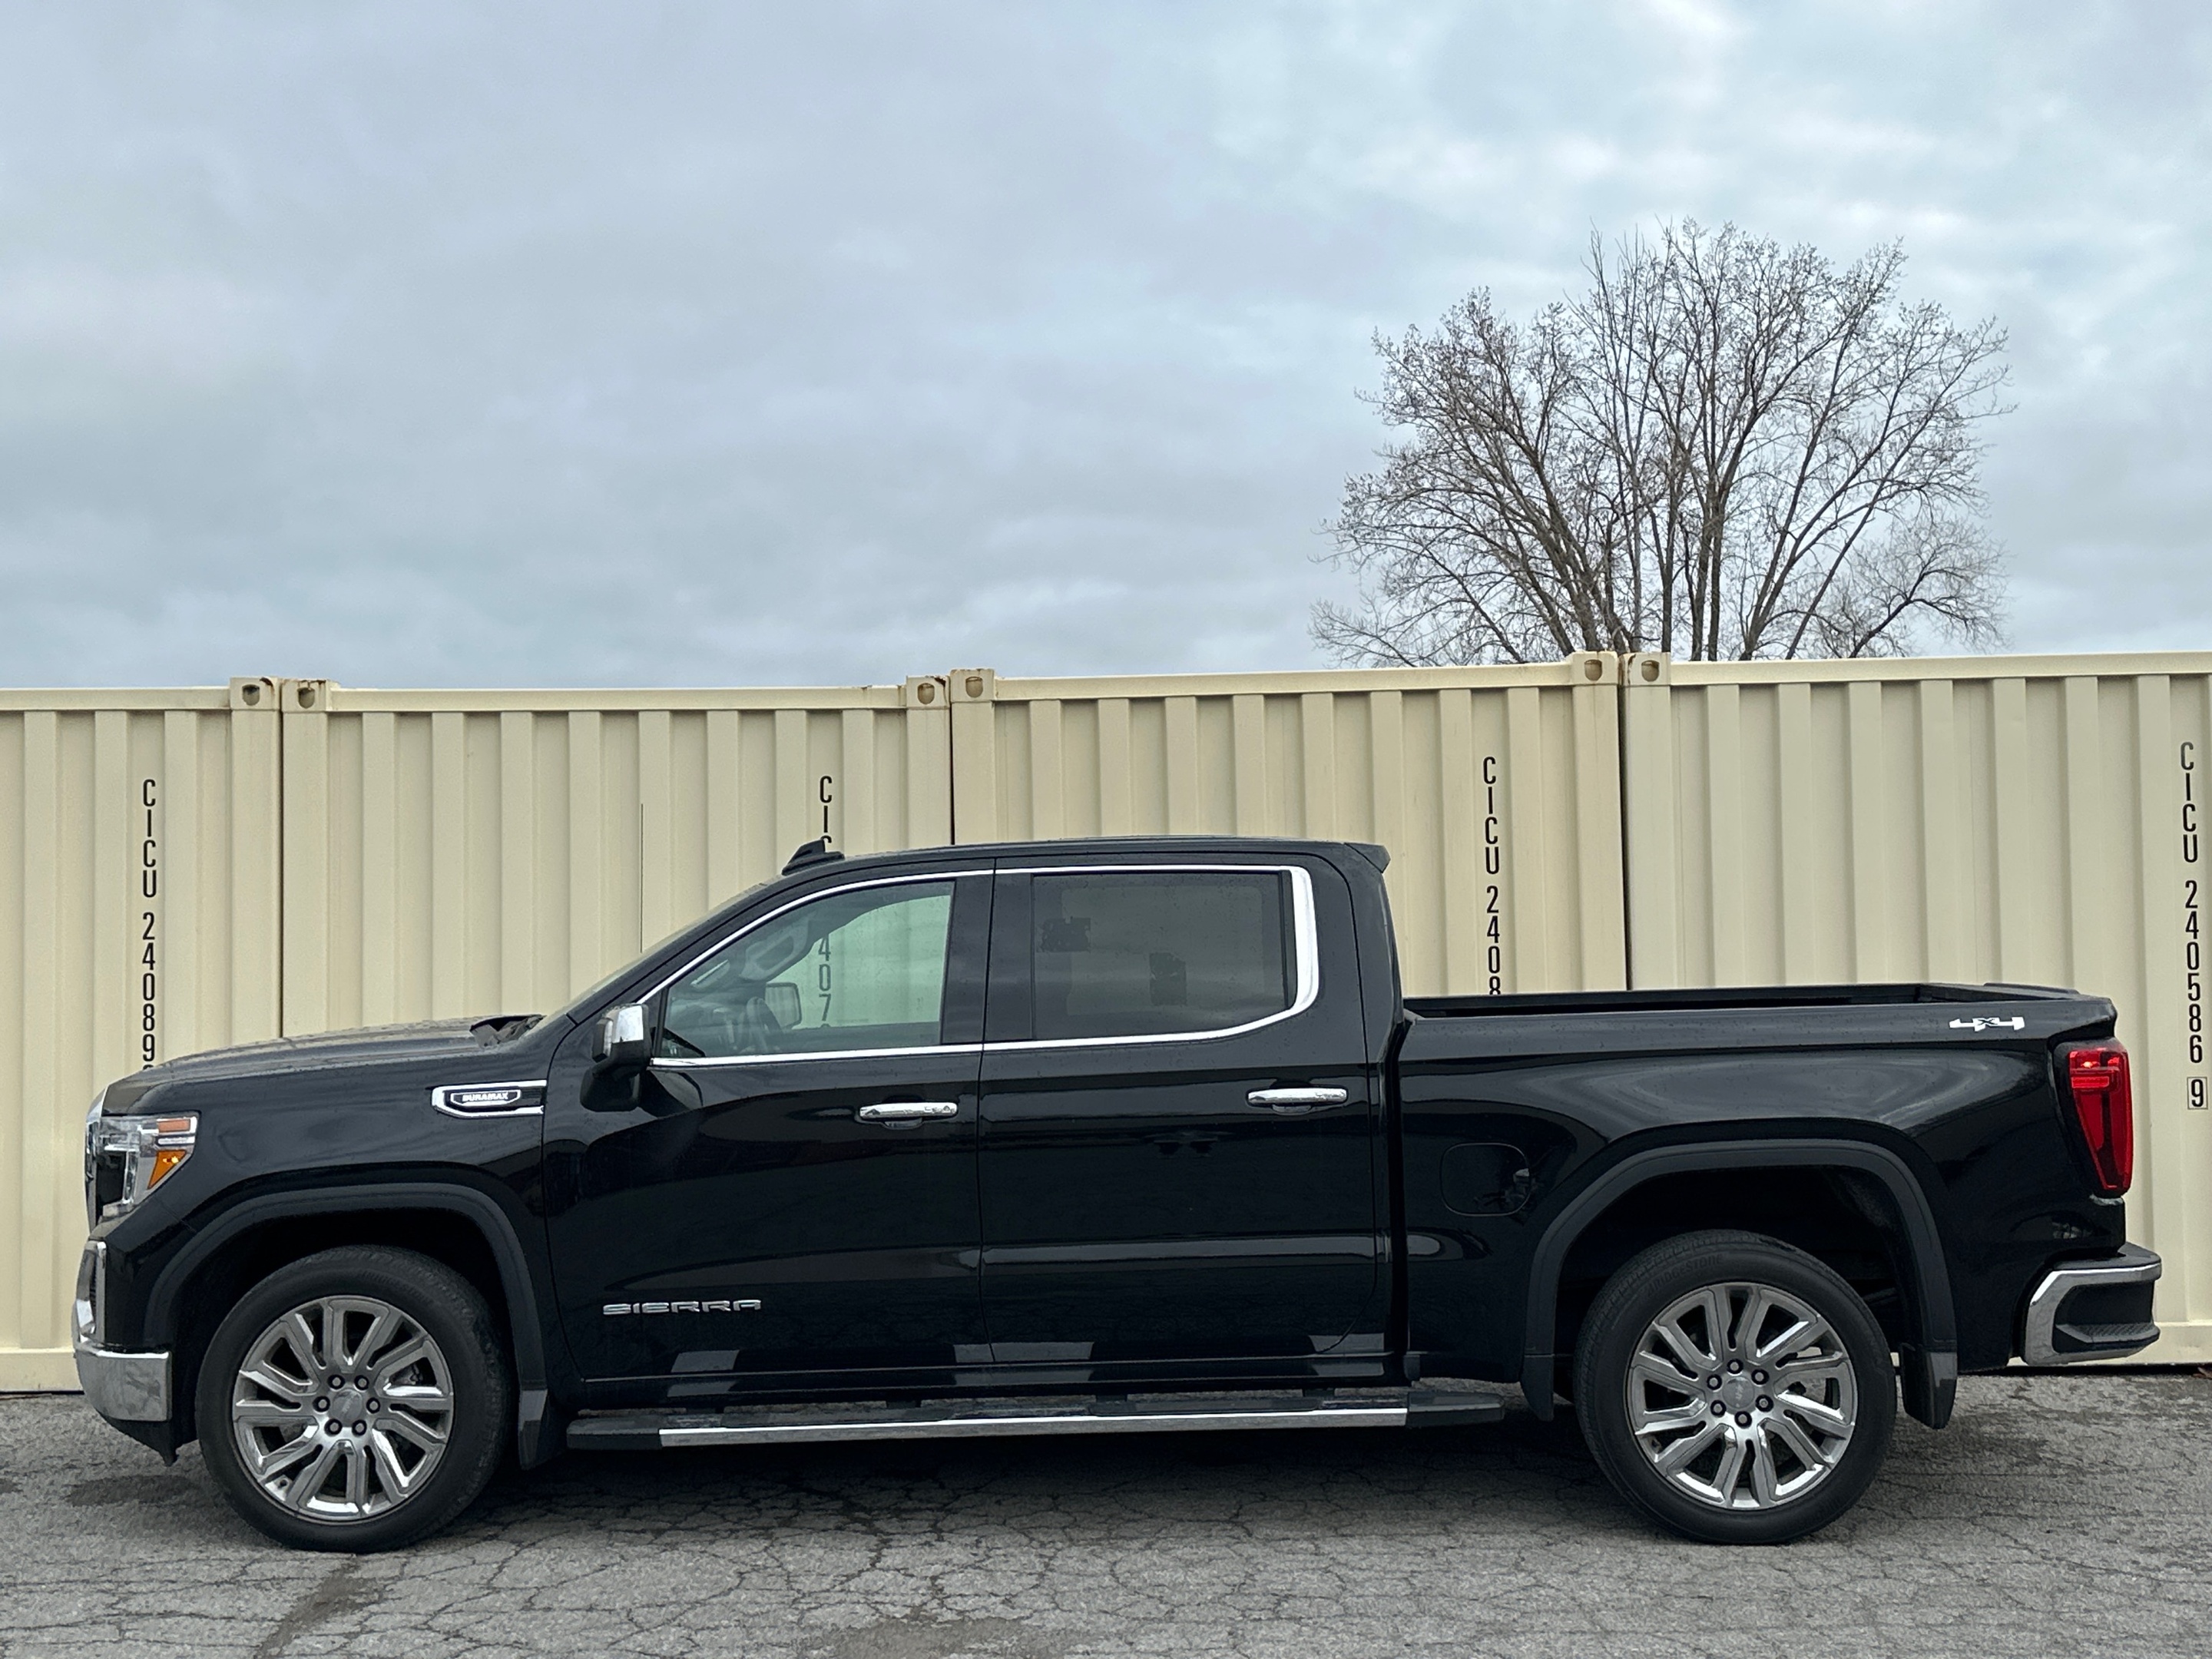 2022 GMC Sierra 1500 Limited SLT LIMITED 4WD DURAMAX! LEATHER, ROOF, NAVI!